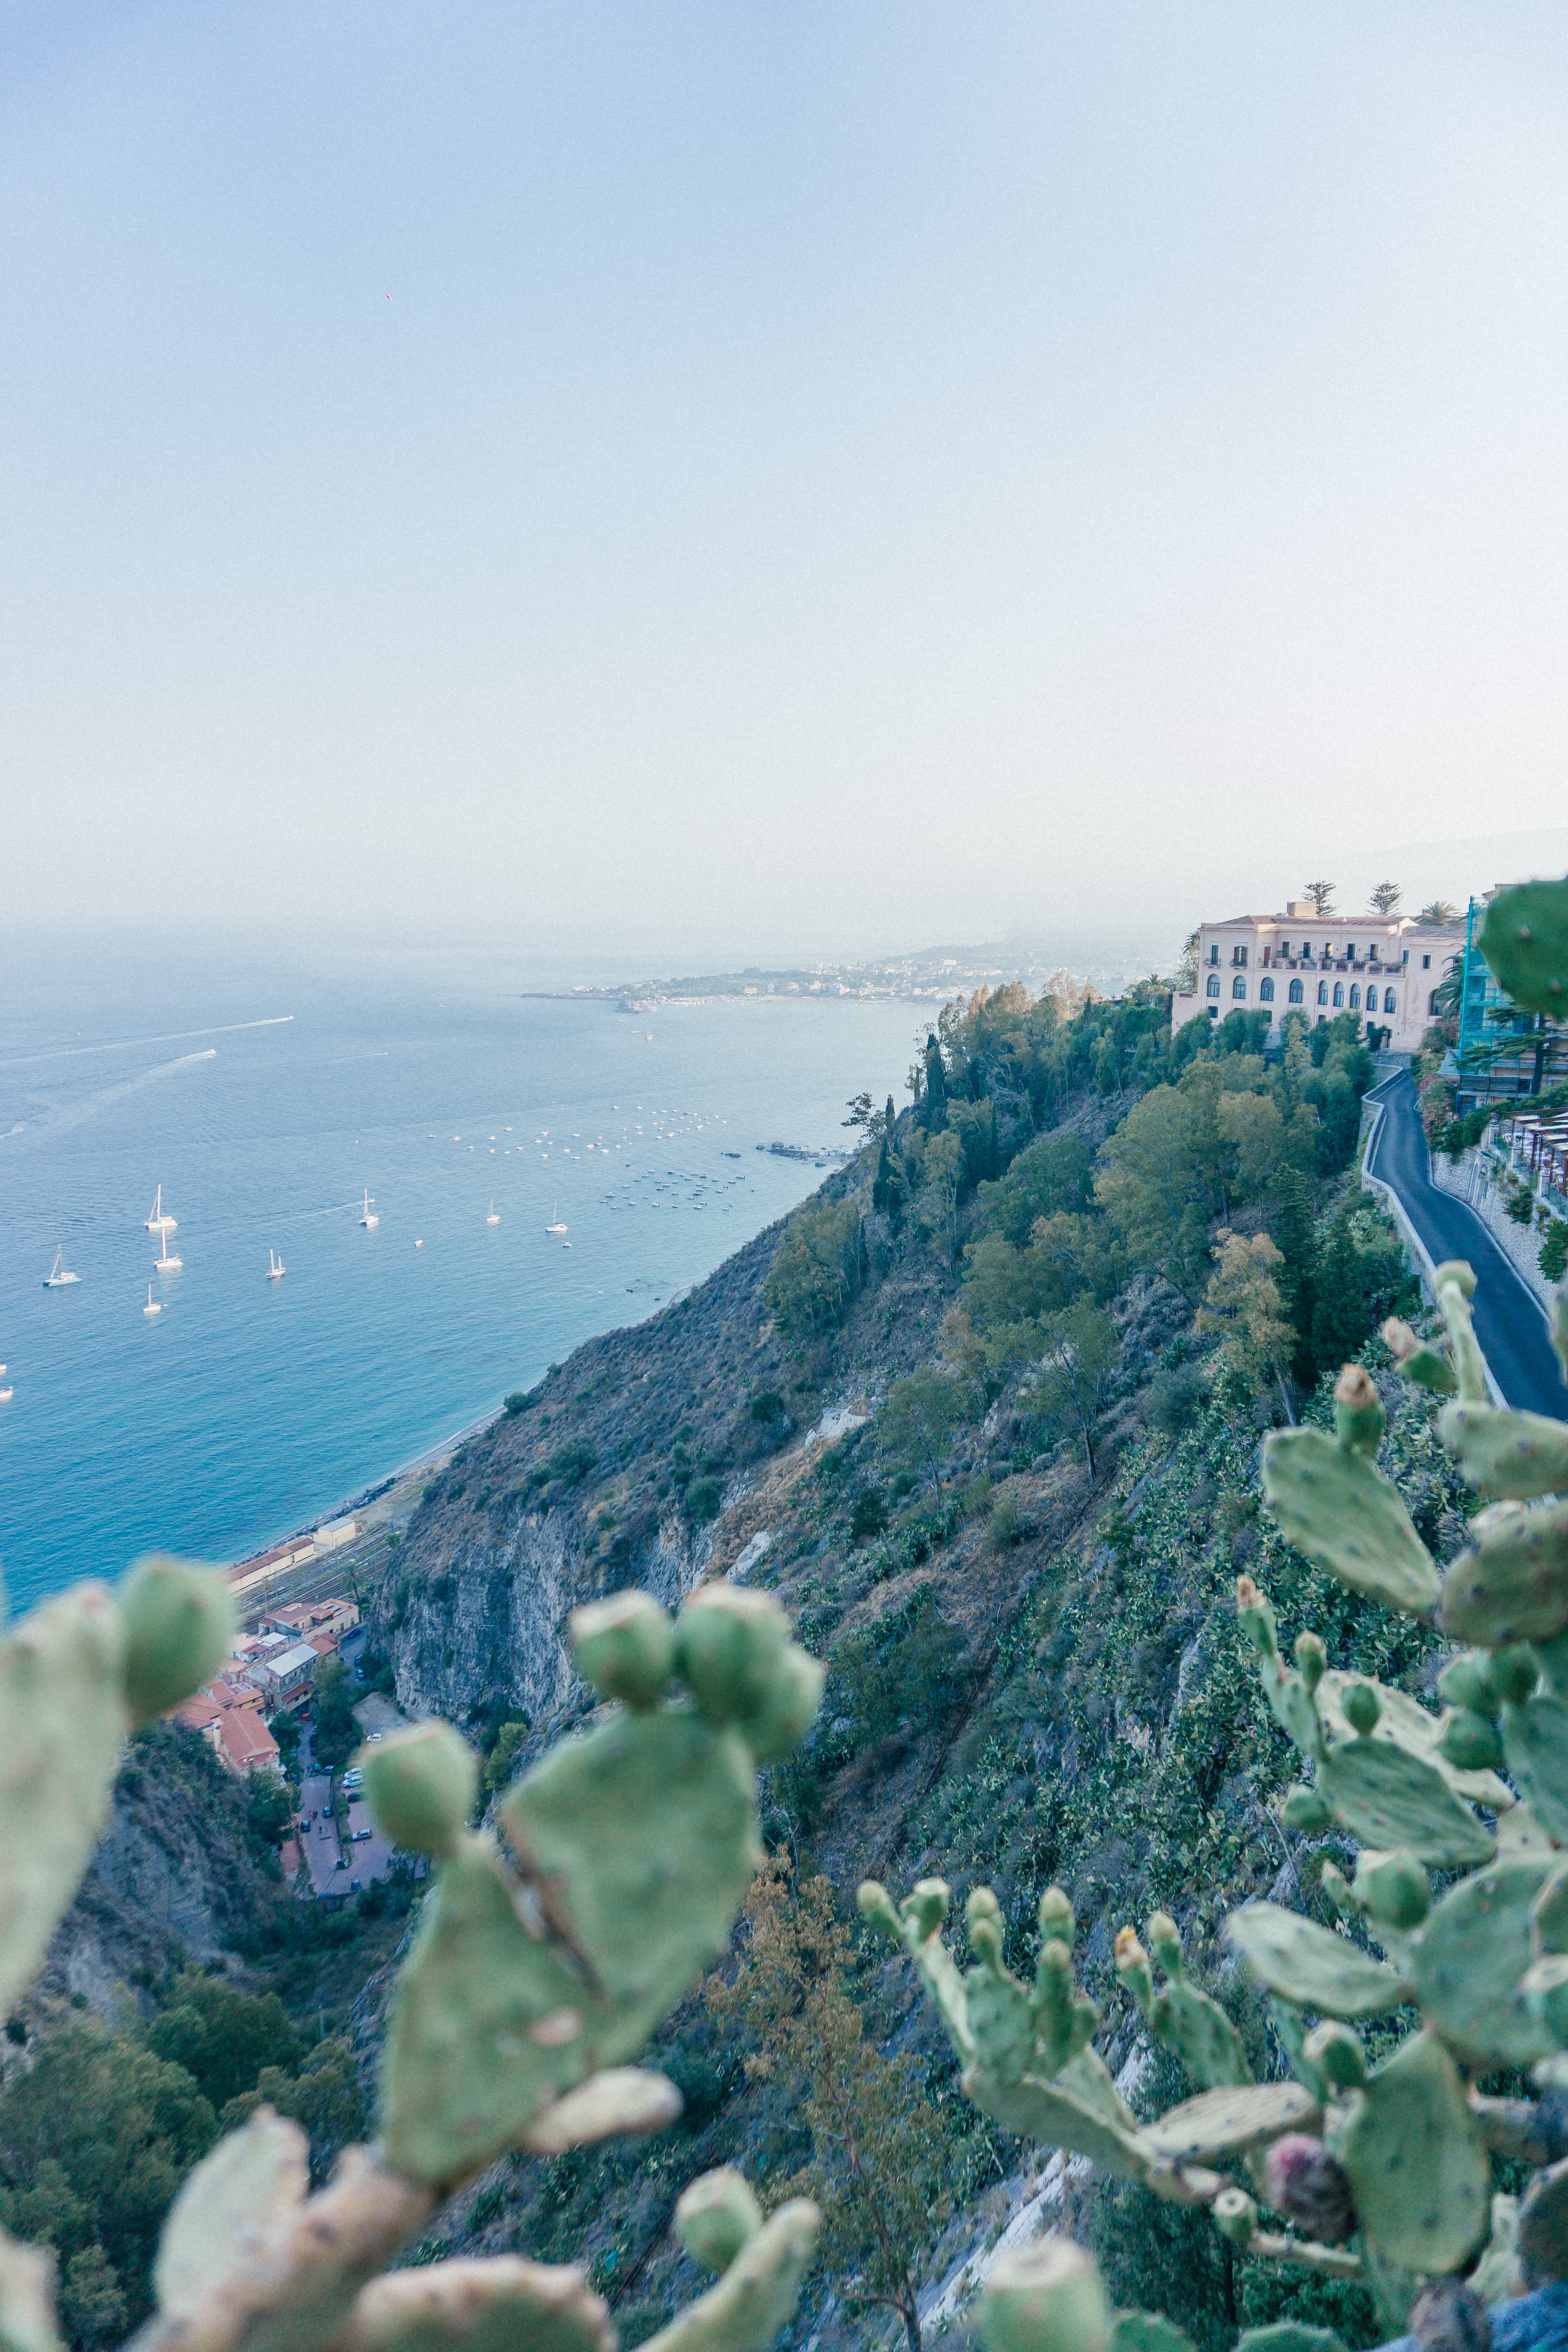 Looking down at the Mediterranean Sea views from the top of the cliff top town of Taormina in Sicily.